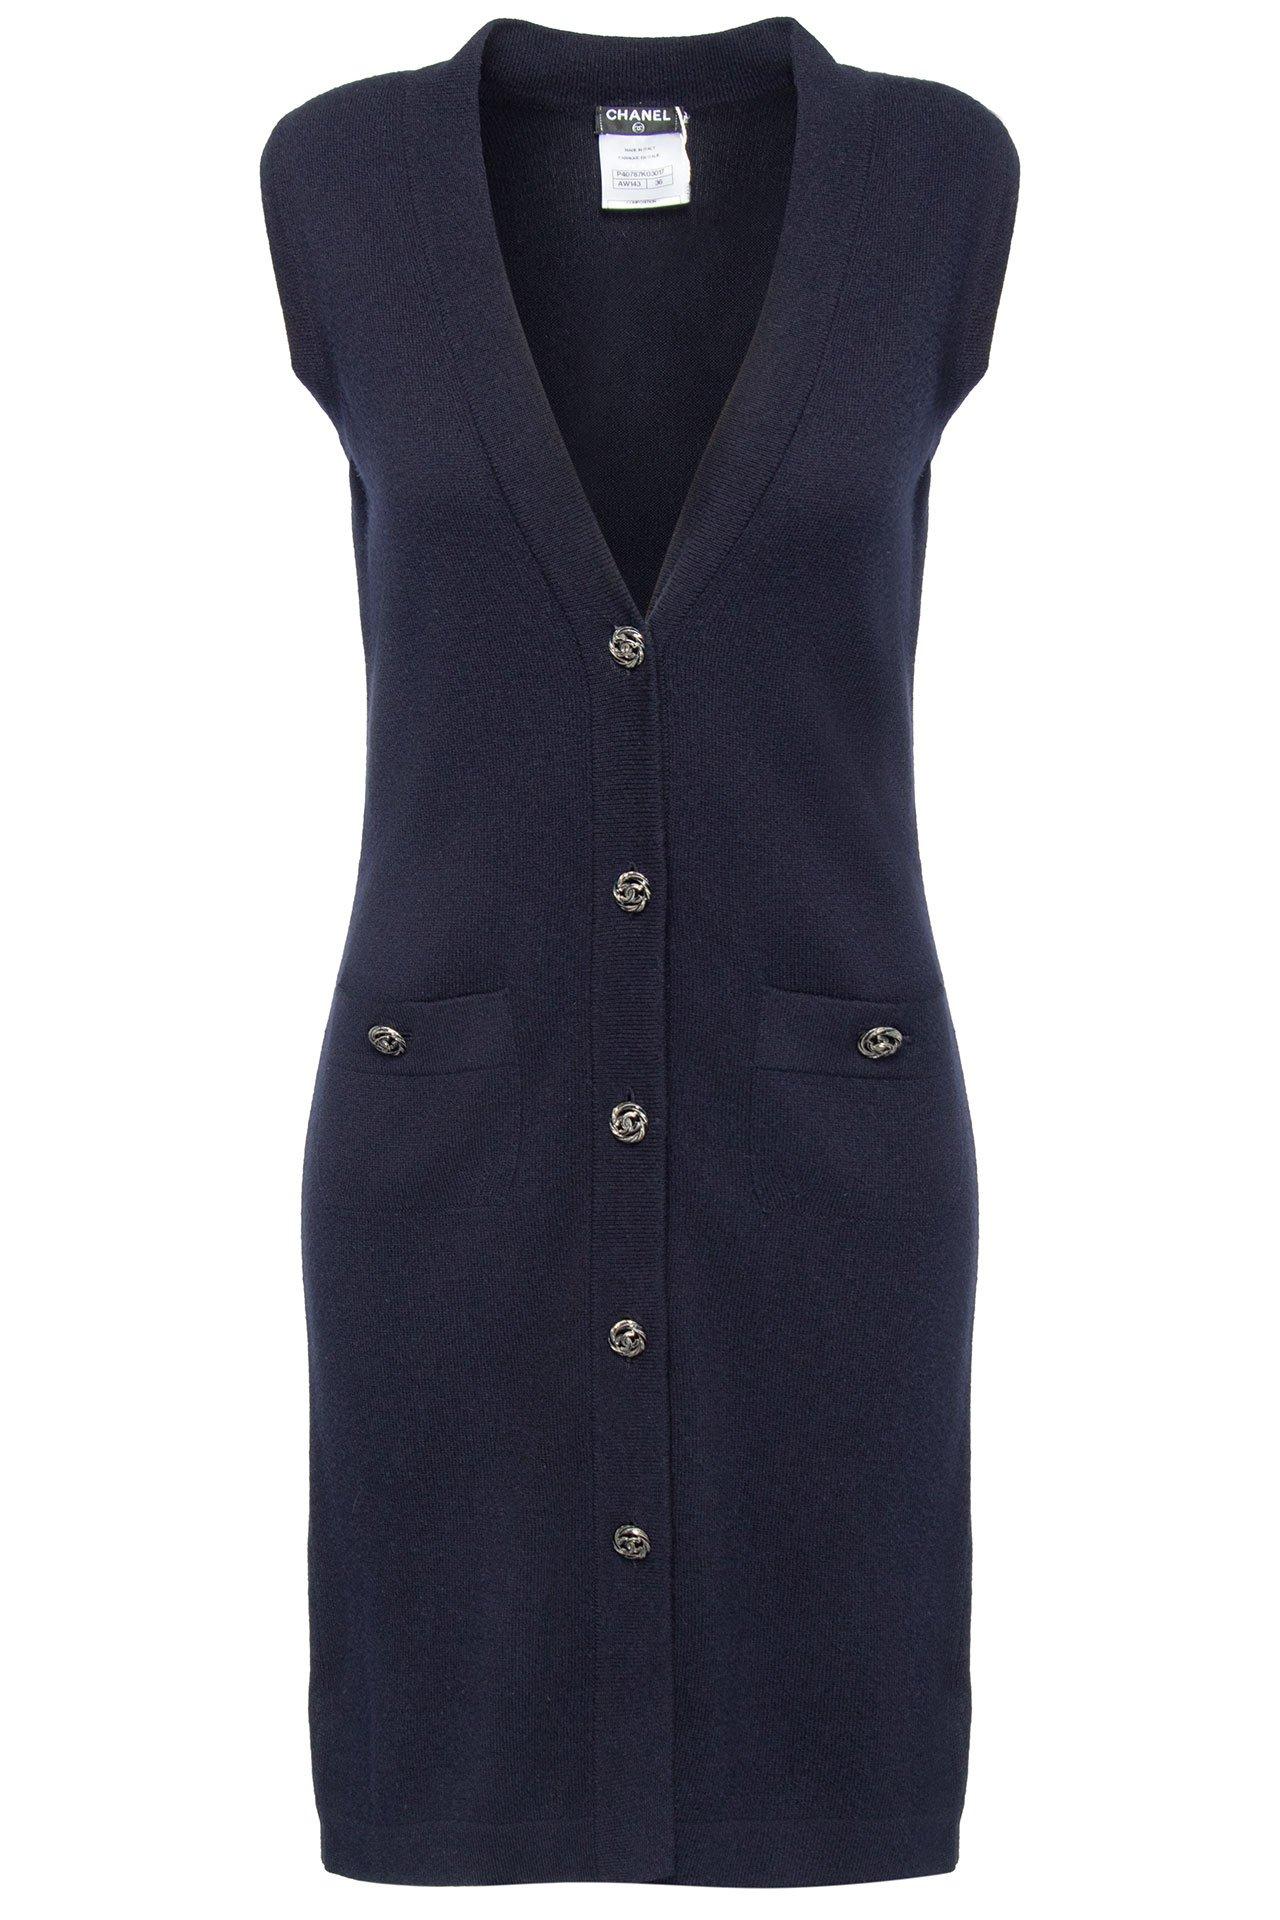 Chanel navy cashmere long vest with CC logo buttons.
Size mark 36 FR. Condition is pristine.